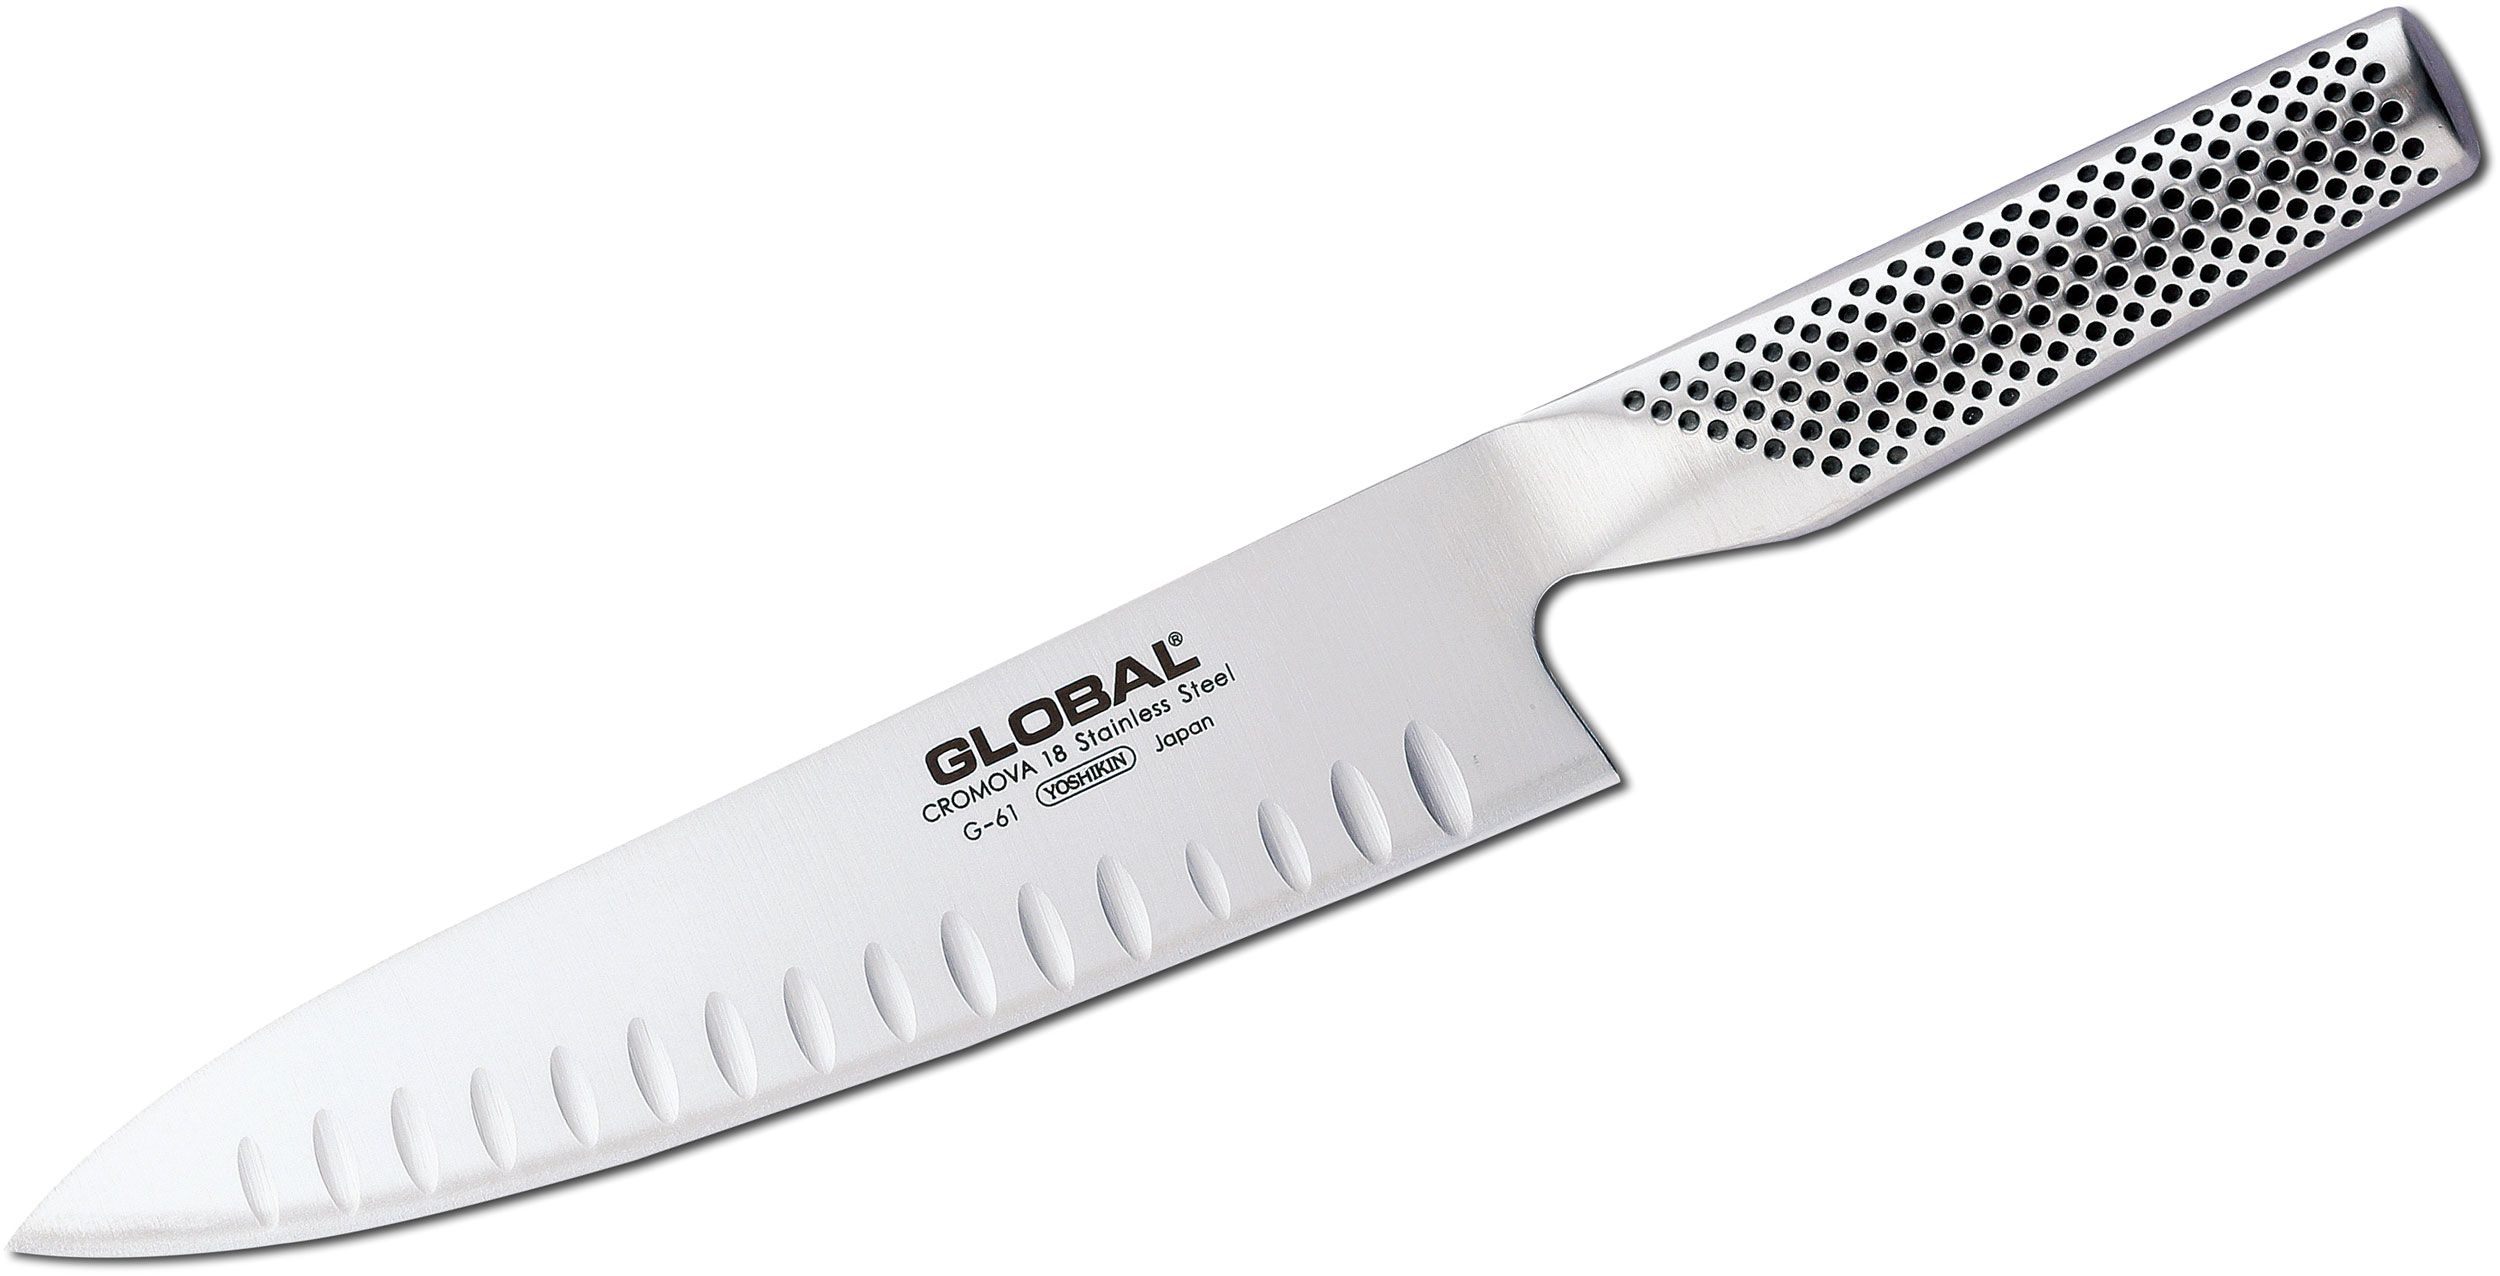 Global G-61 Classic 8 Chef's Knife, Hollow Ground - KnifeCenter